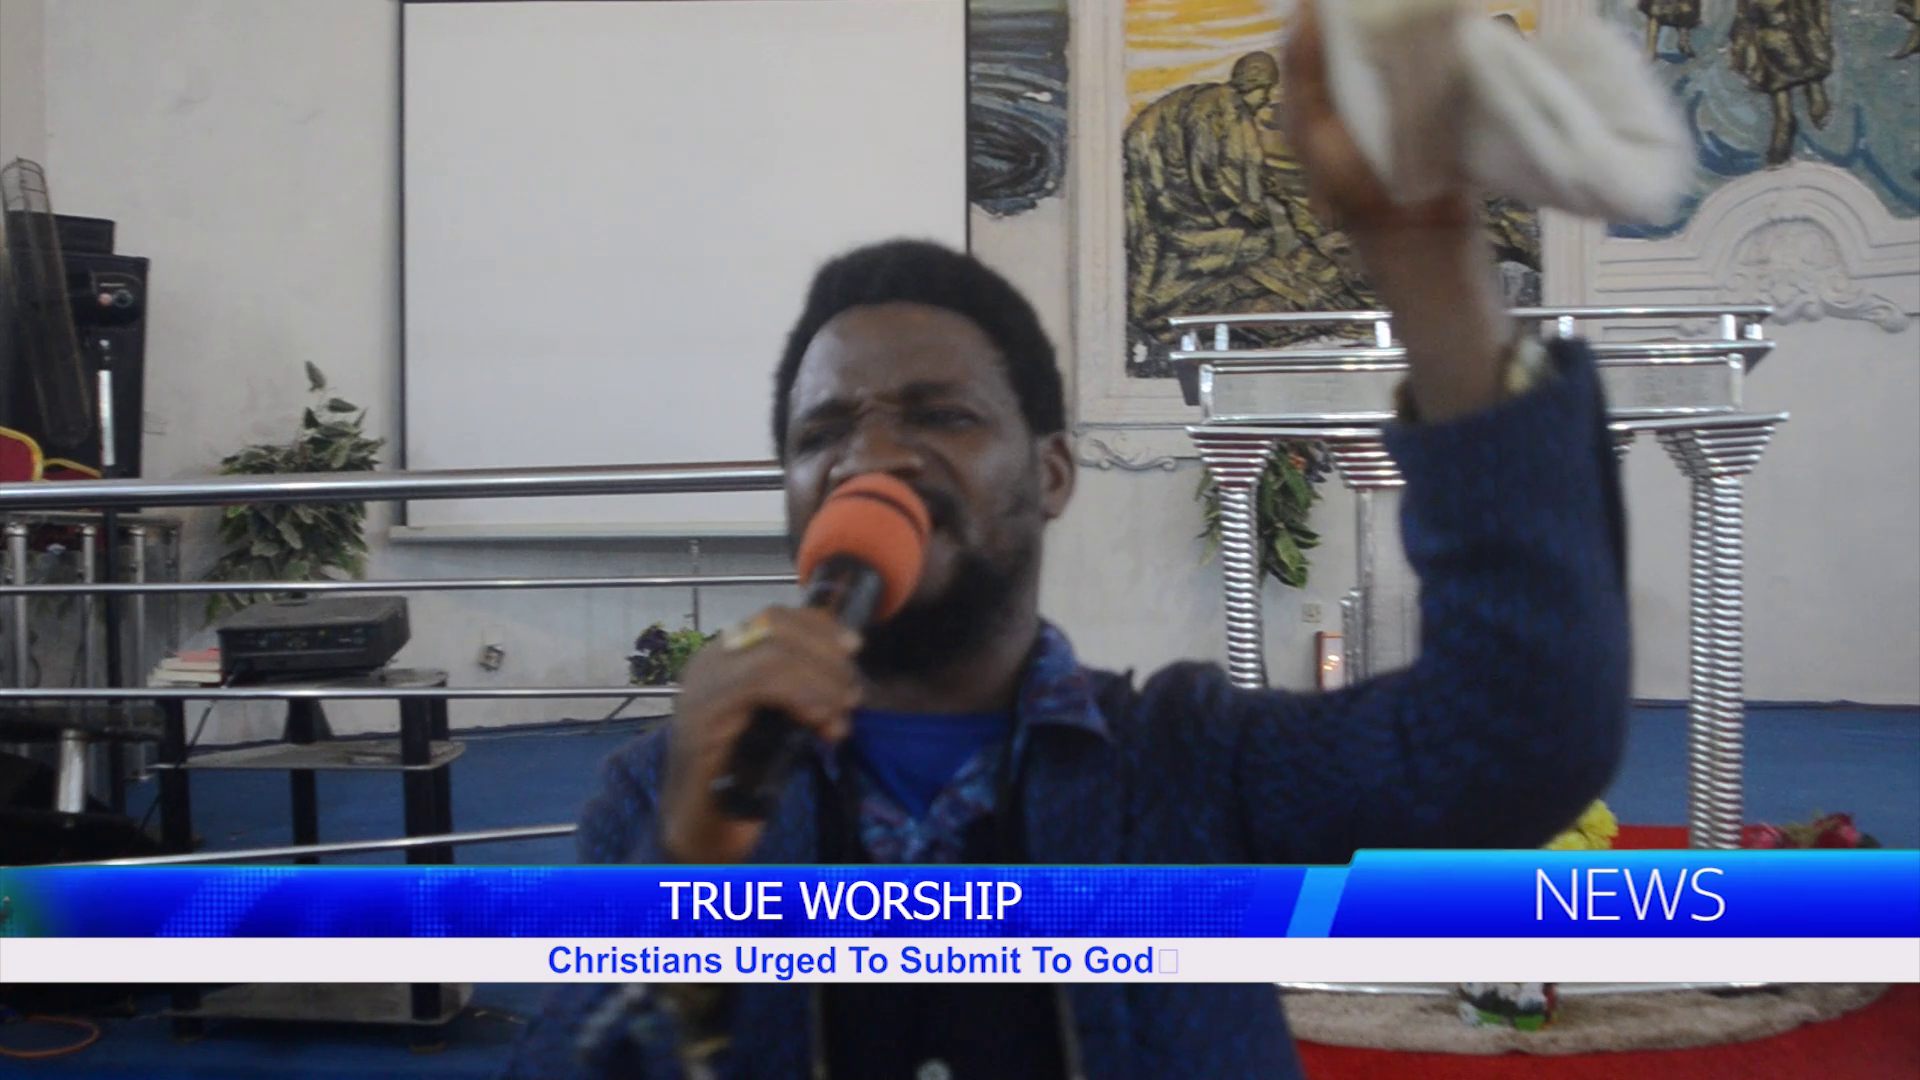 True Worship: Christians Urged To Submit To God